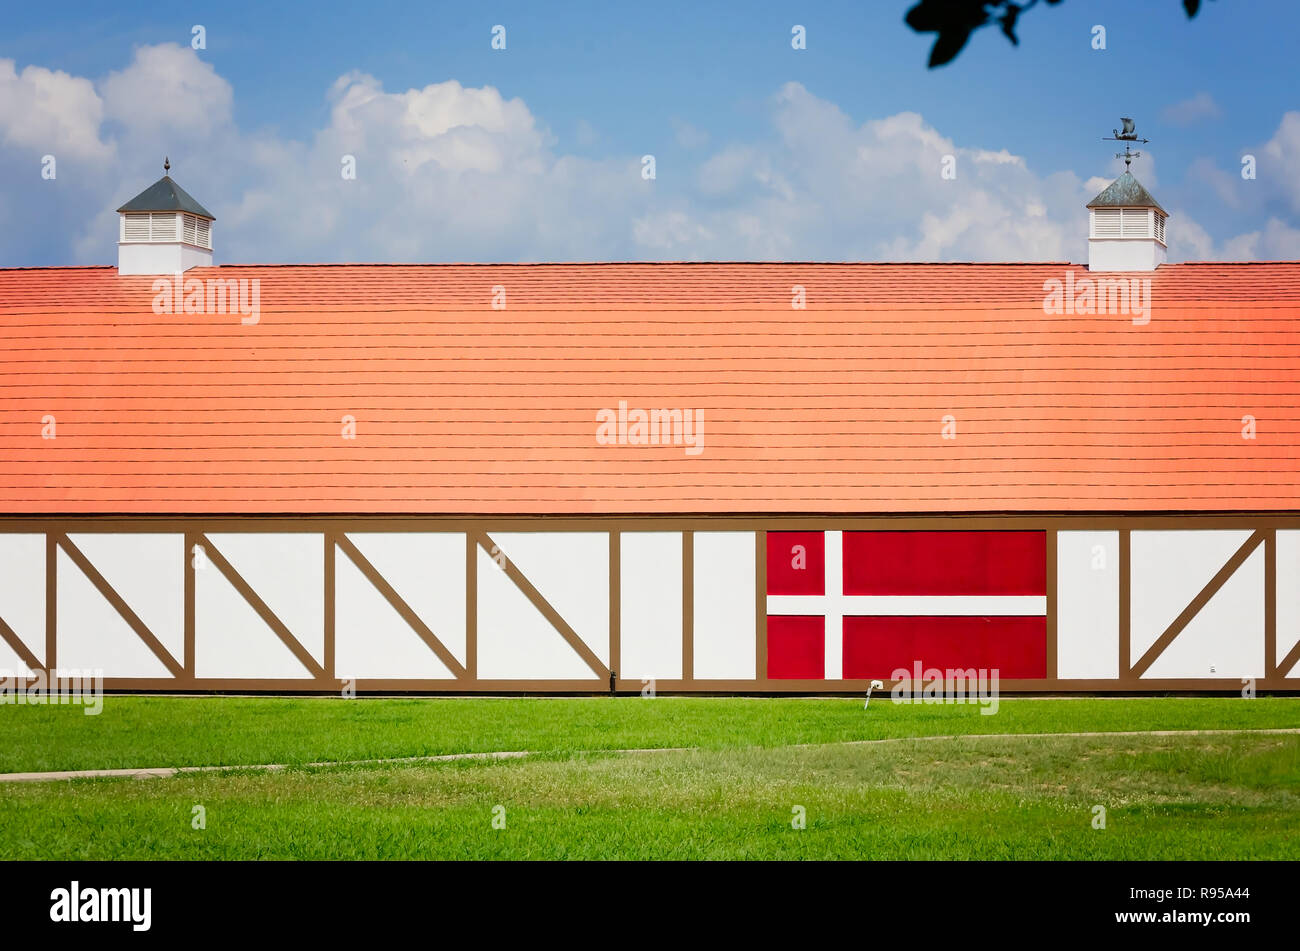 The Danish Heritage Museum is pictured, Sept. 3, 2017, in Danevang, Texas. The museum is paintedwith a Denmark flag motif. Stock Photo